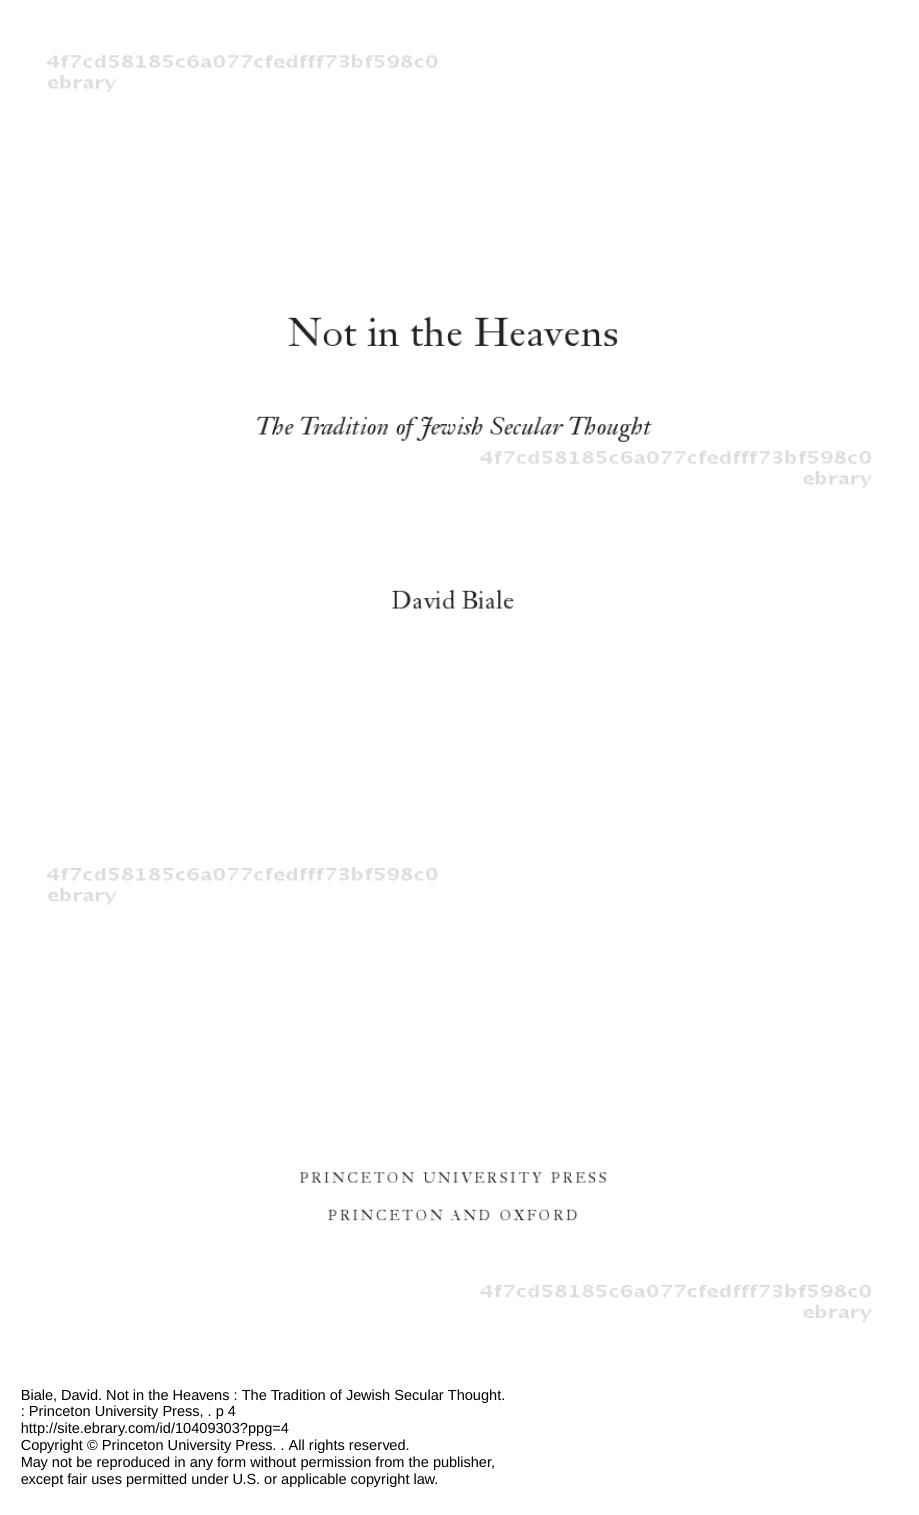 Not in the Heavens: The Tradition of Jewish Secular Thought by David Biale